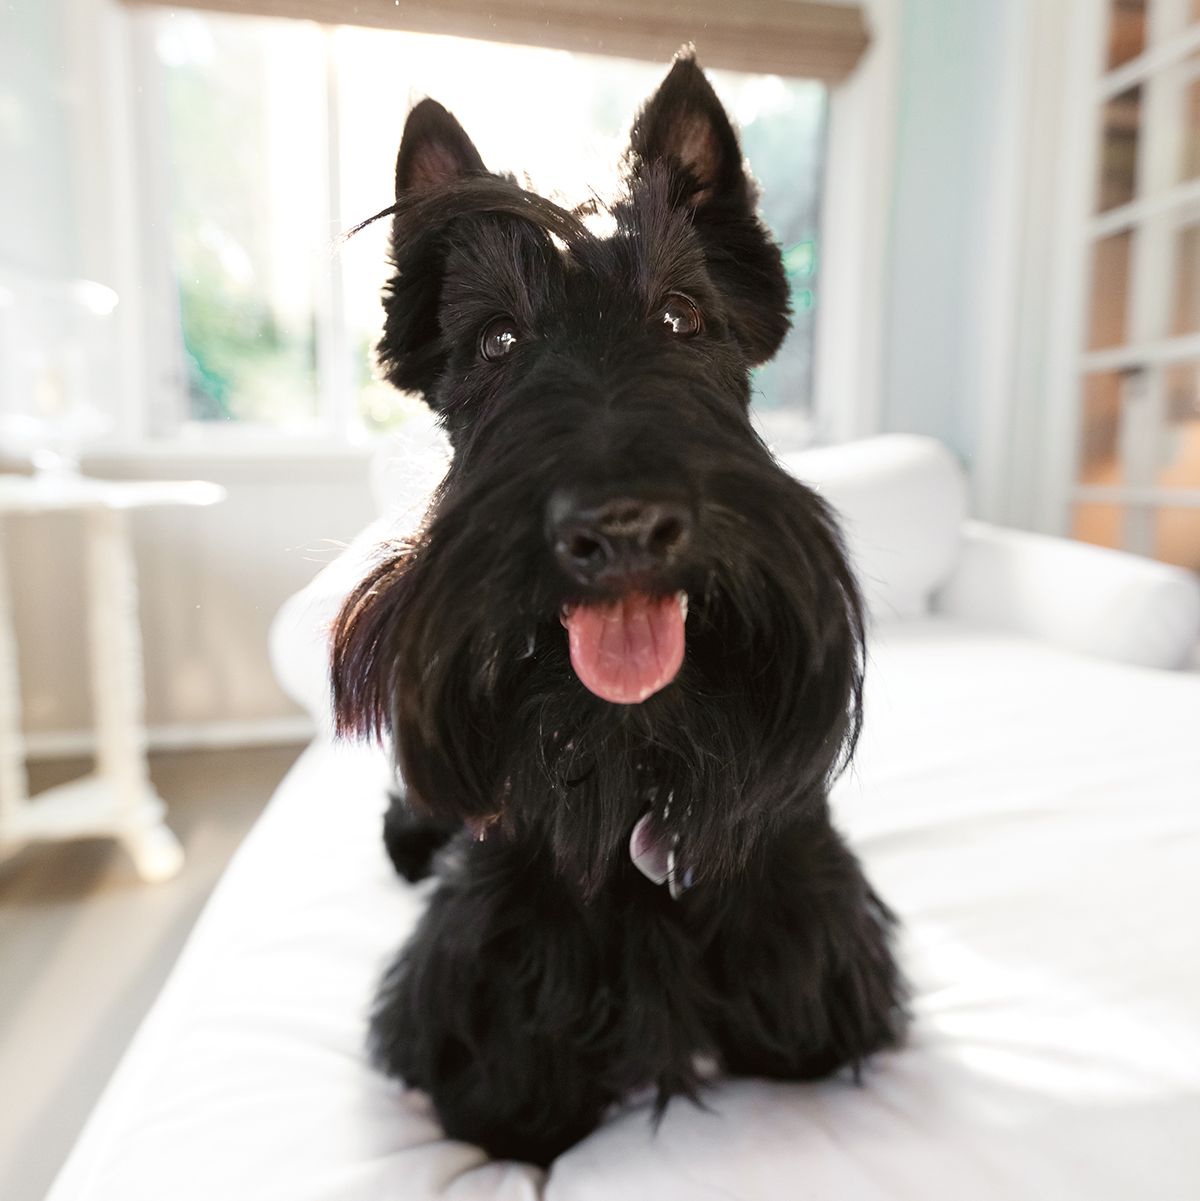 Maggie the Scottish Terrier smiles for a pet portrait on the couch.